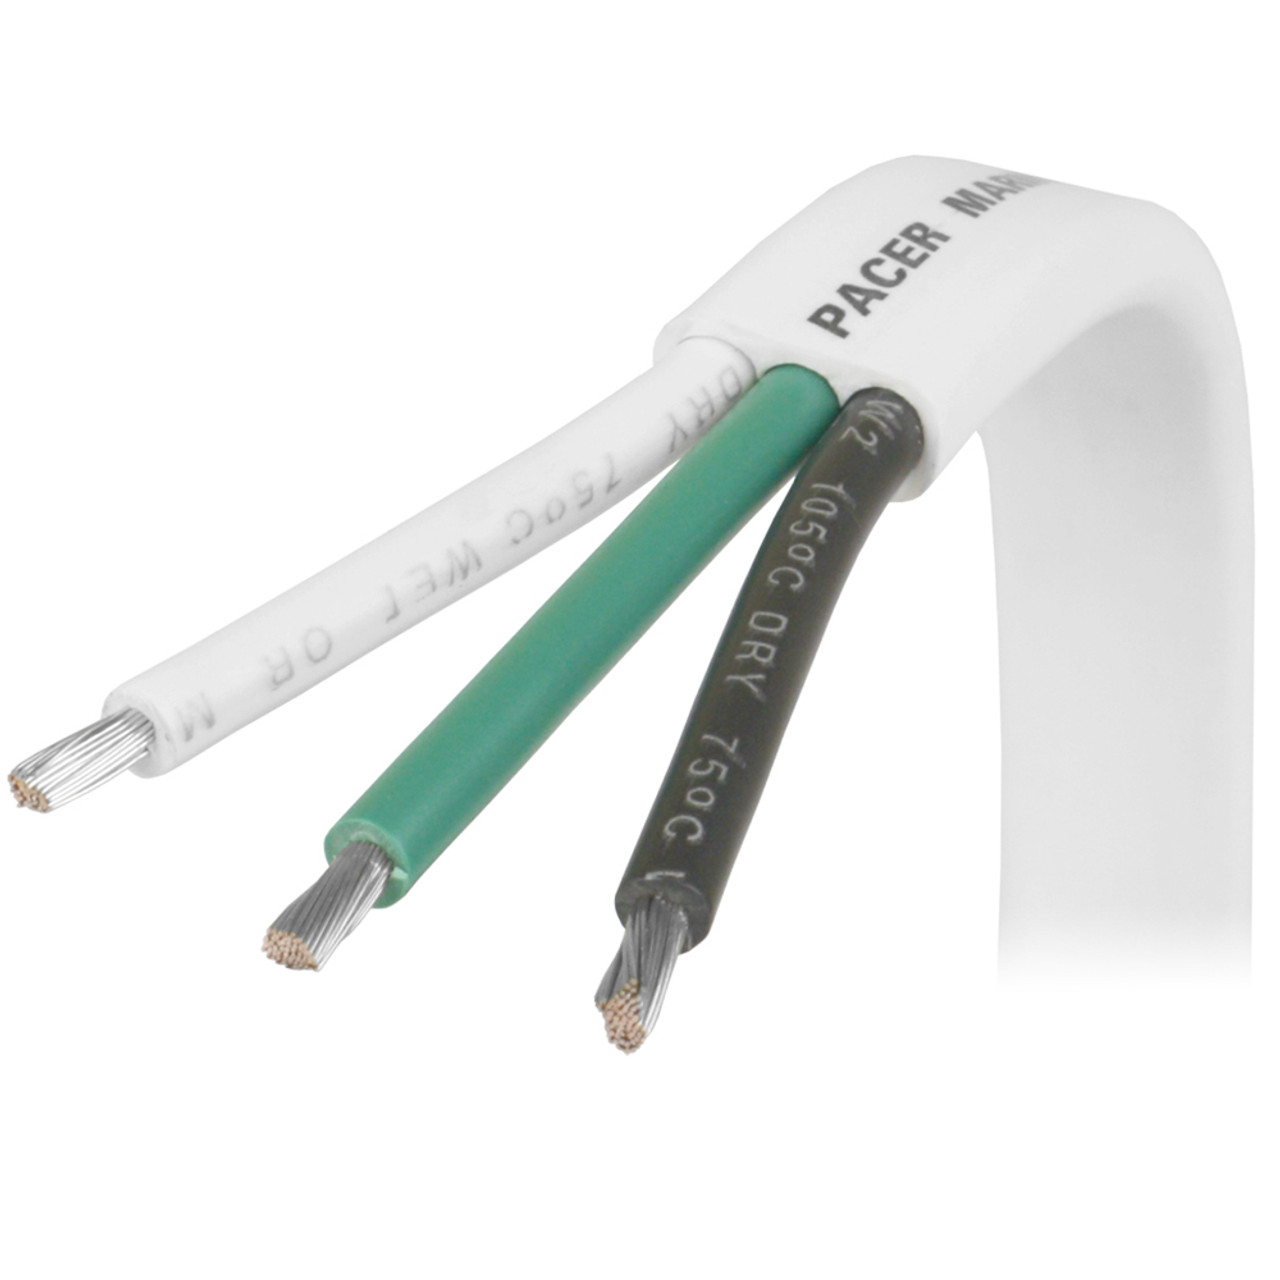 Pacer 10/3 AWG Triplex Cable - Black/Green/White - 100